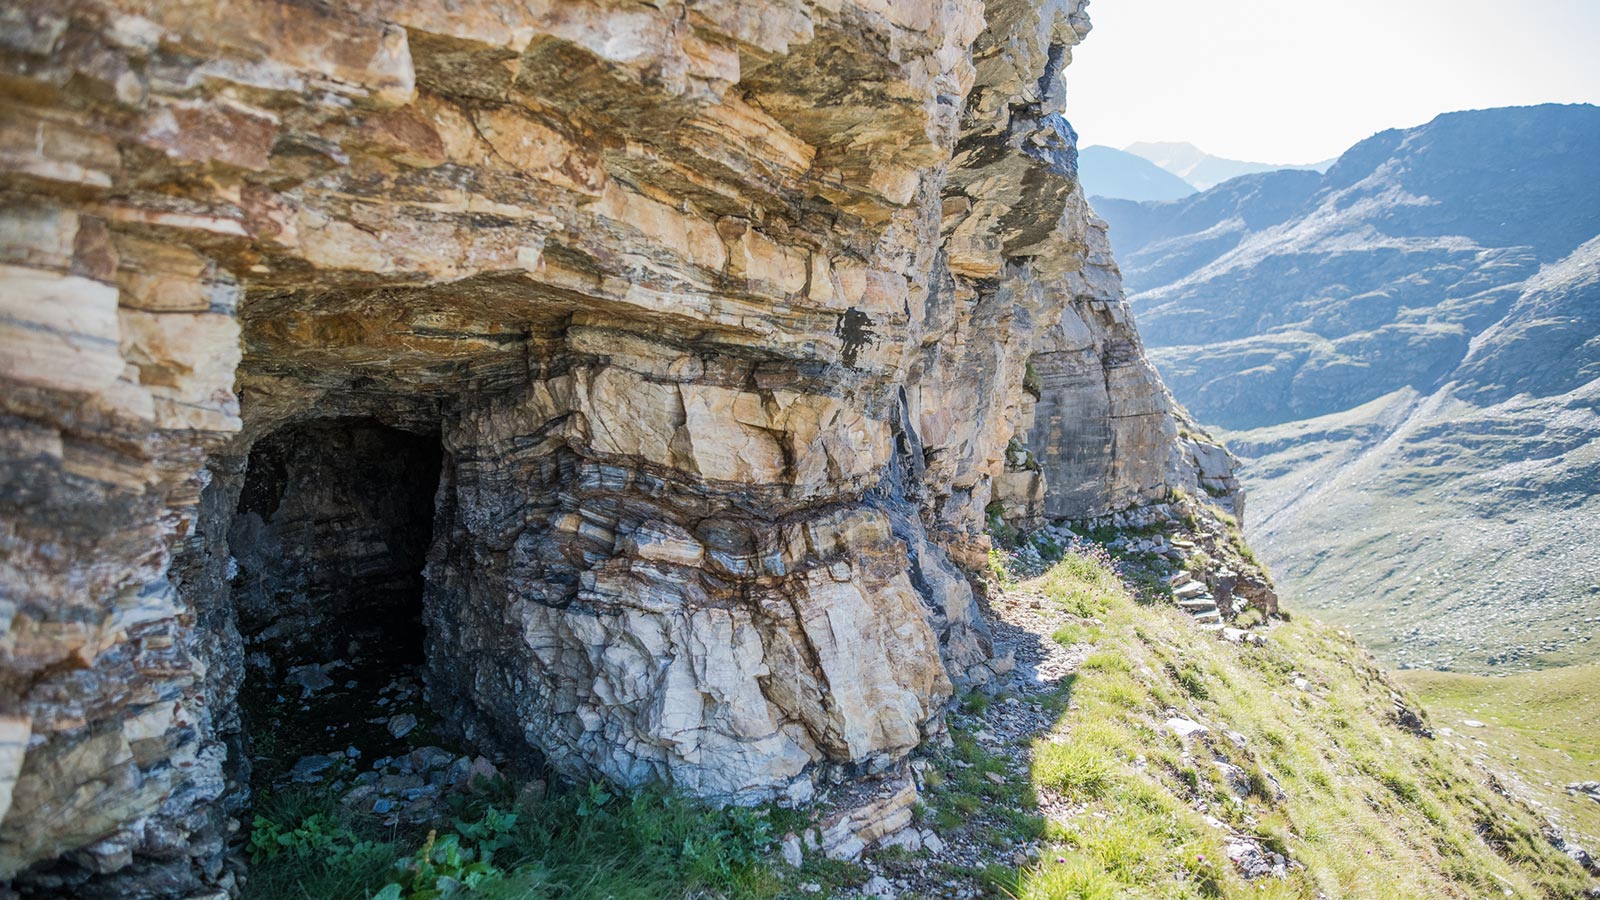 Detail of one of the caves near the Sunny Valley Mountain Lodge